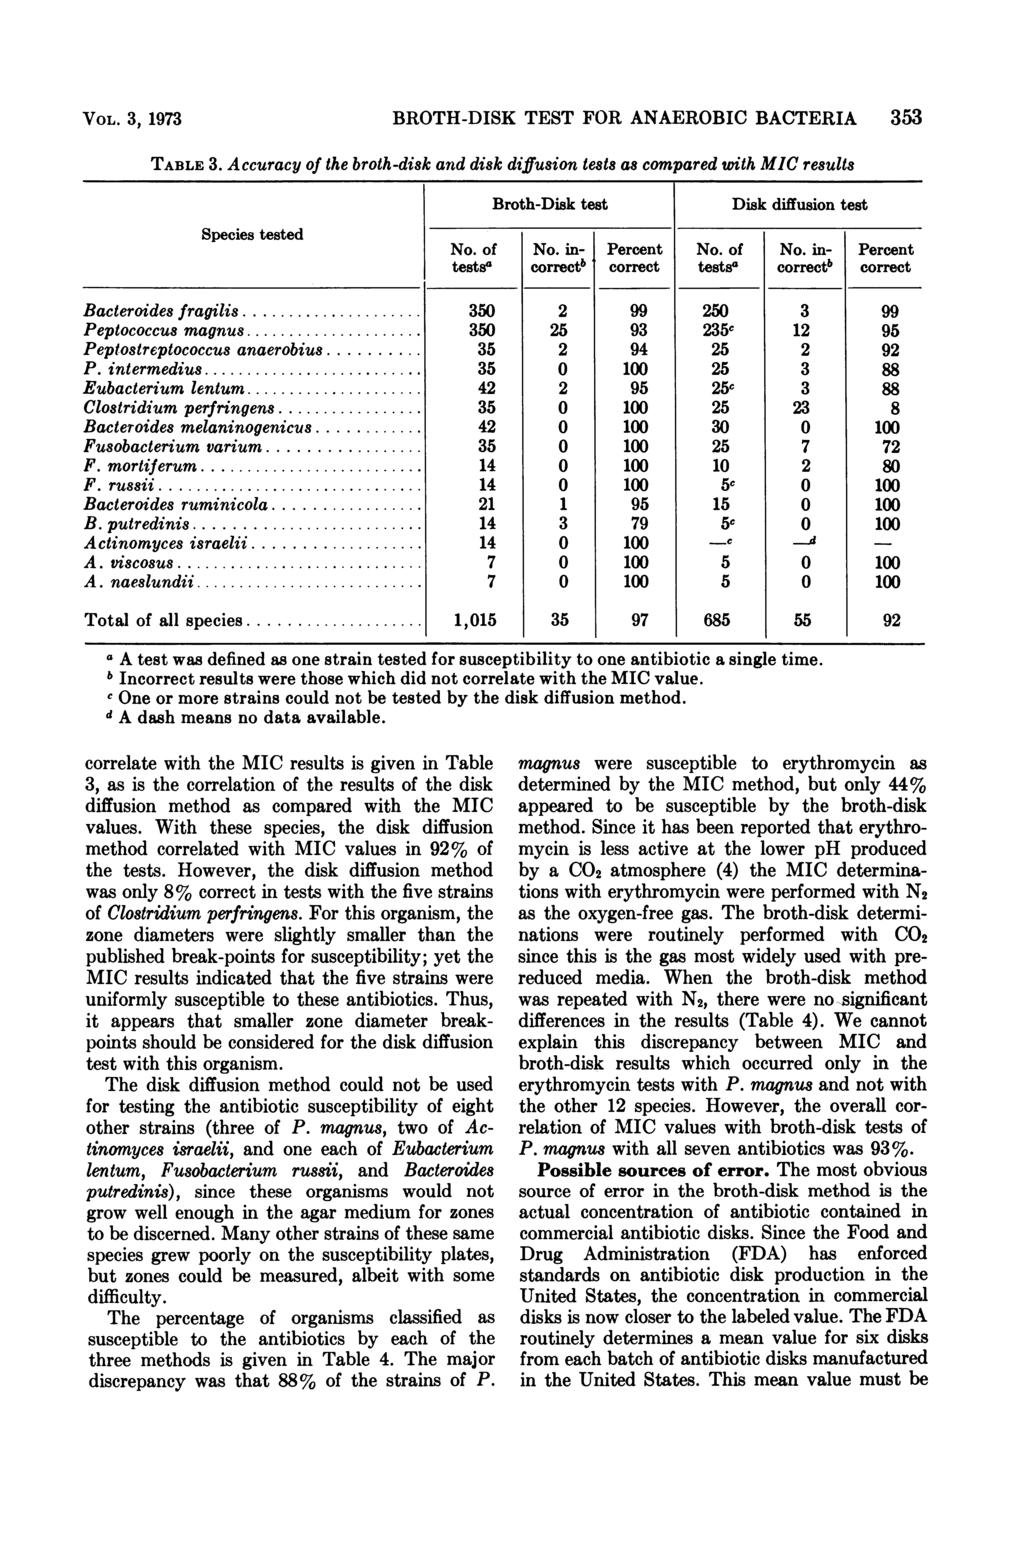 VOL. 3t 1973 BROTH-DISK TEST FOR ANAEROBIC BACTERIA 353 TABLE 3. Accuracy of the broth-disk and disk diffusion tests as compared with MIC results Broth-Disk test Disk diffusion test Species tested No.